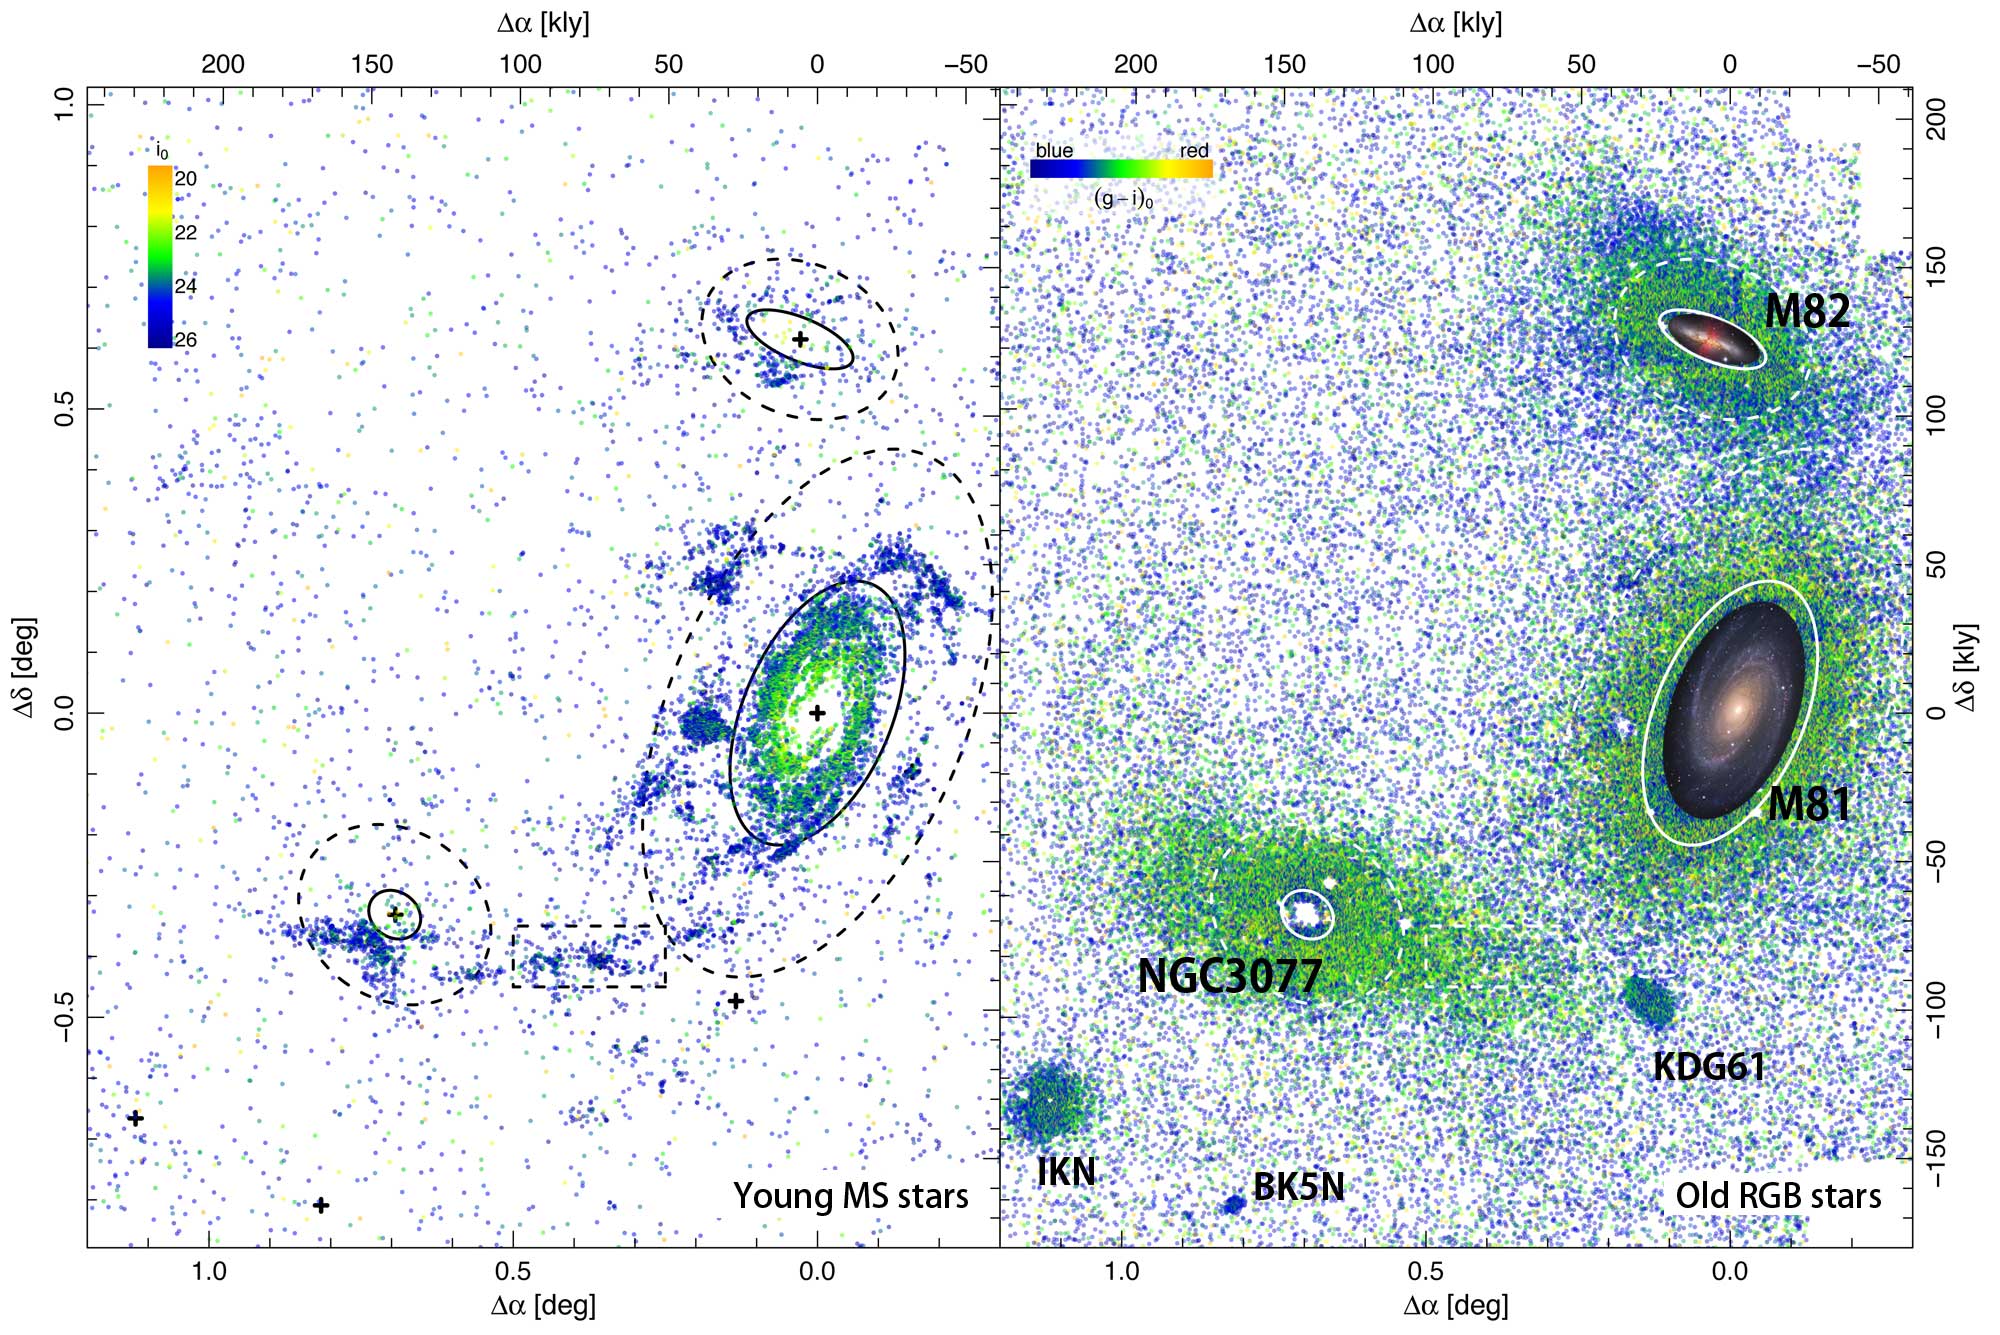 M81 galaxy showing young and old stars, with axes showing light years. Image: National Astronomical Observatory of Japan Hyper Suprime-Cam project